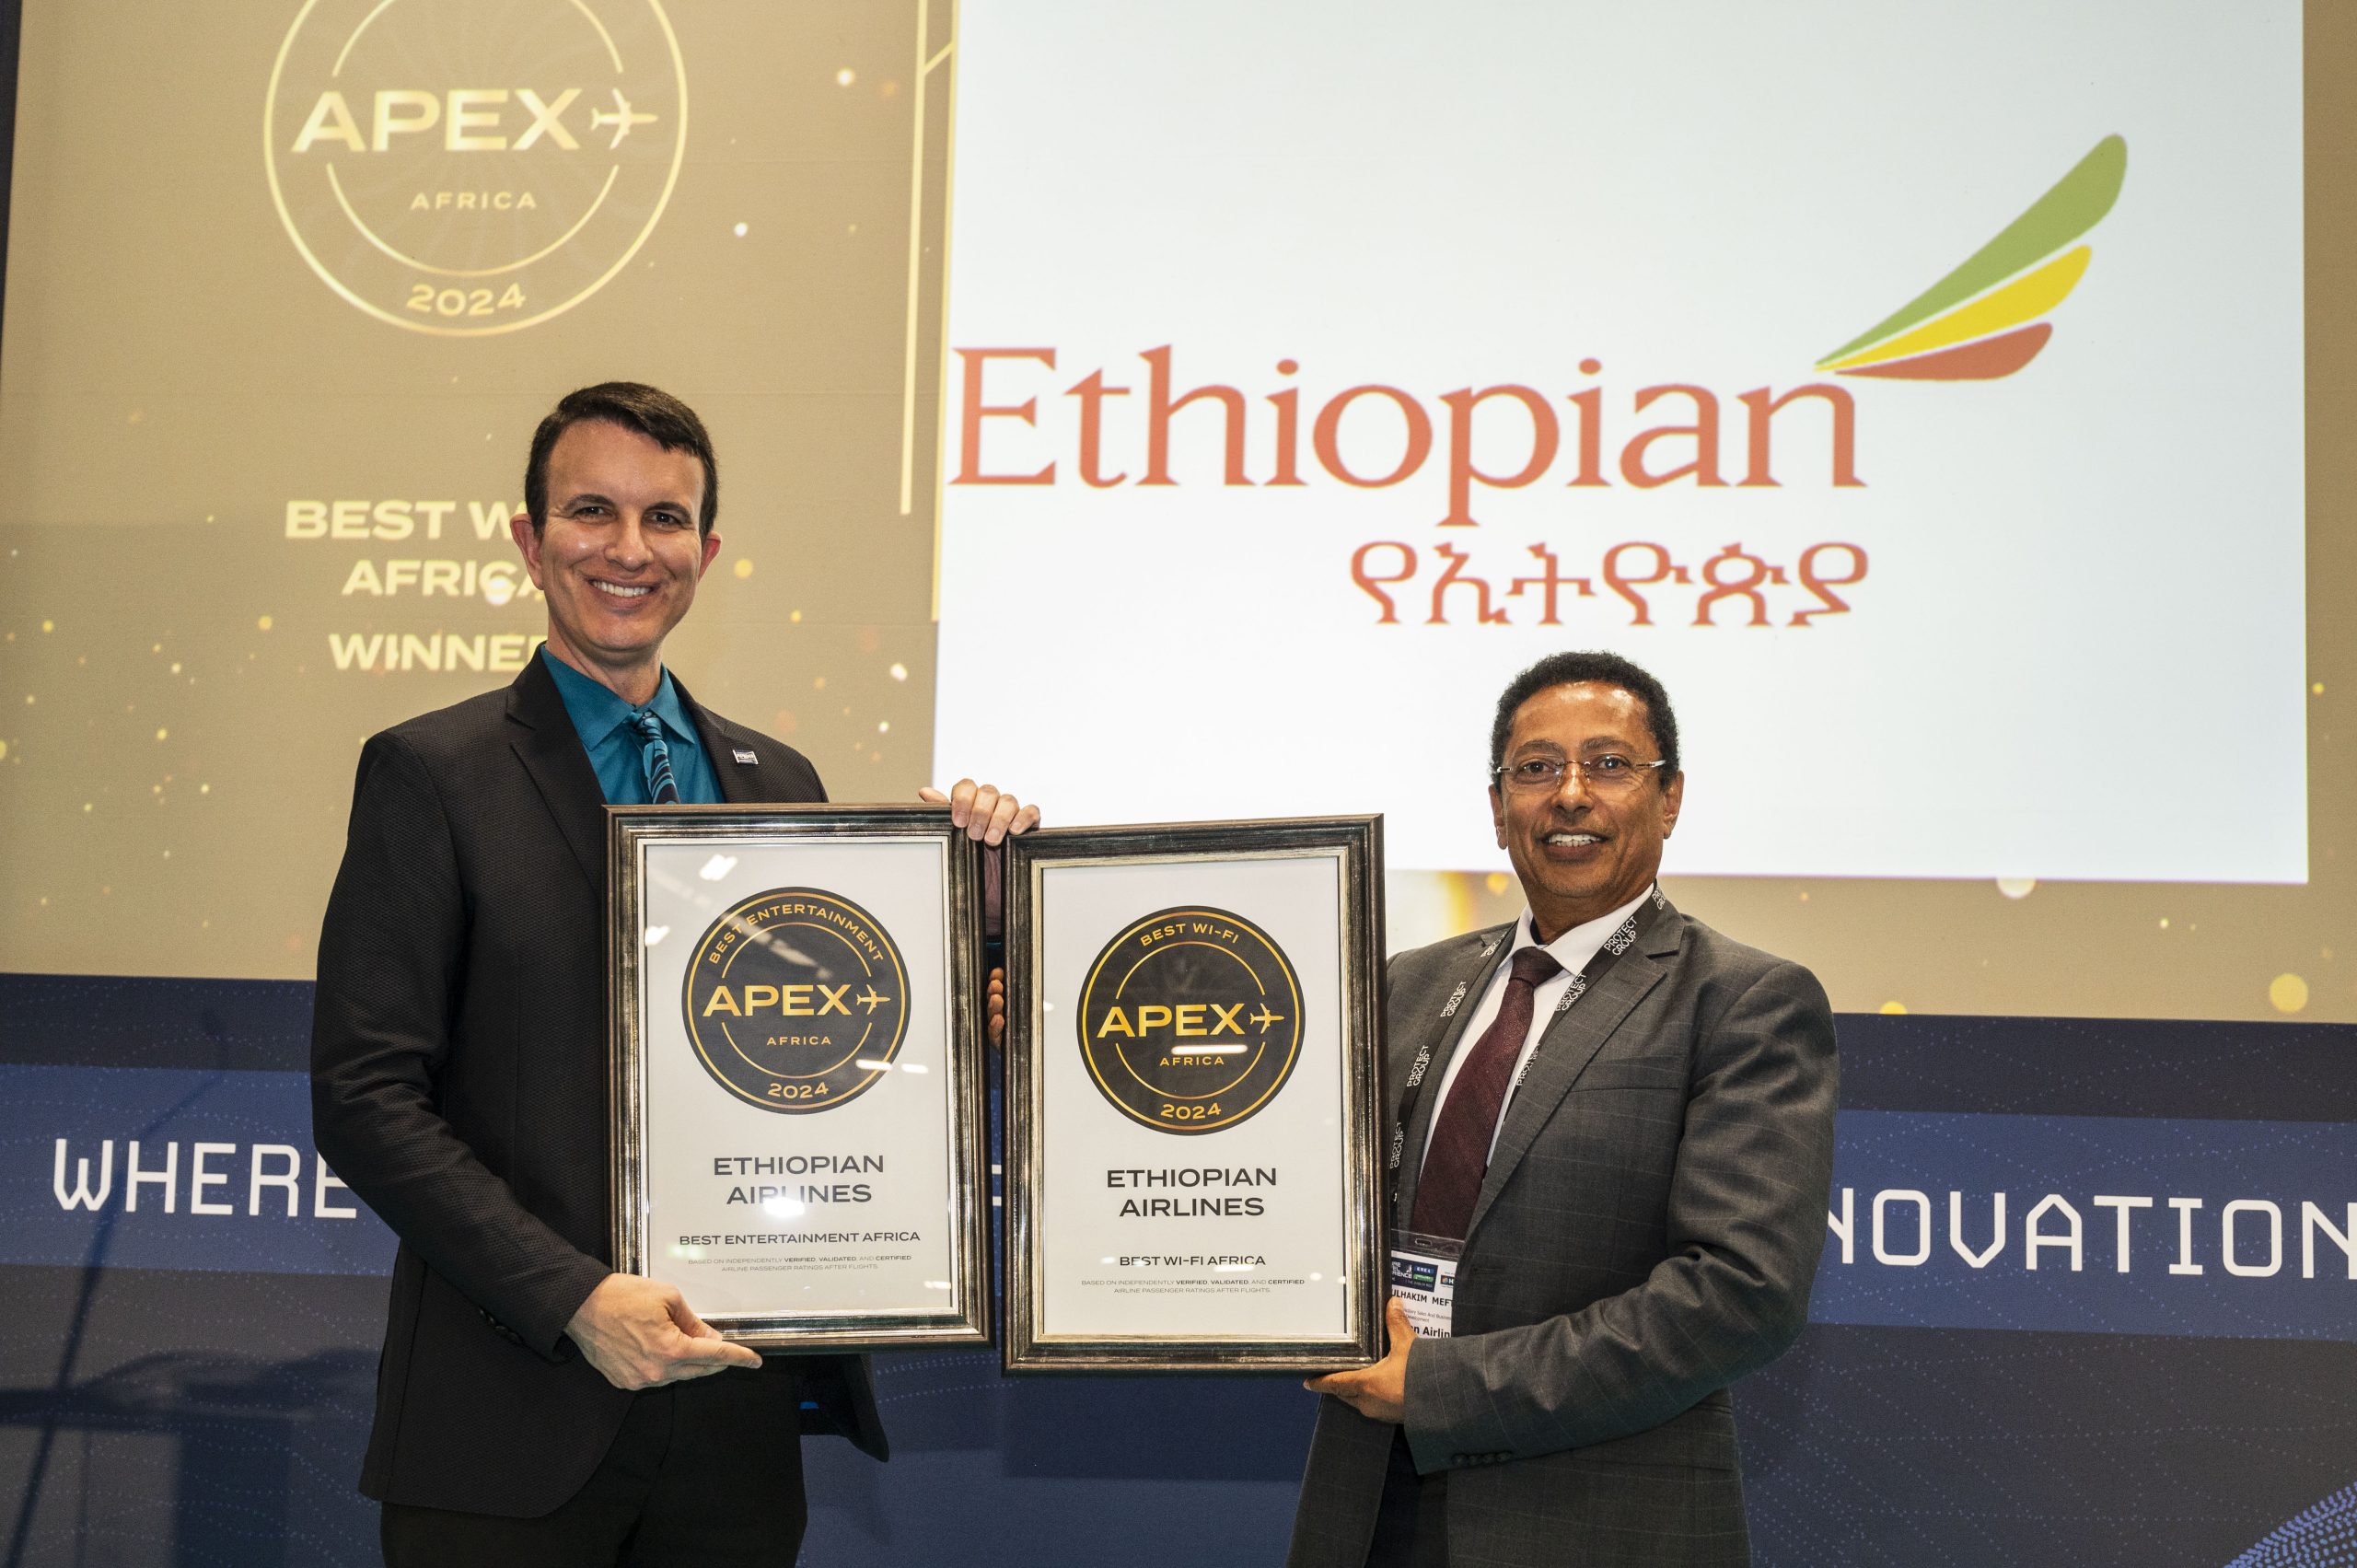 Ethiopian Airlines soars to new heights with 'Best Entertainment' and 'Best Wi-Fi' Awards JOEL OLADELE, — National Accord Newspaper